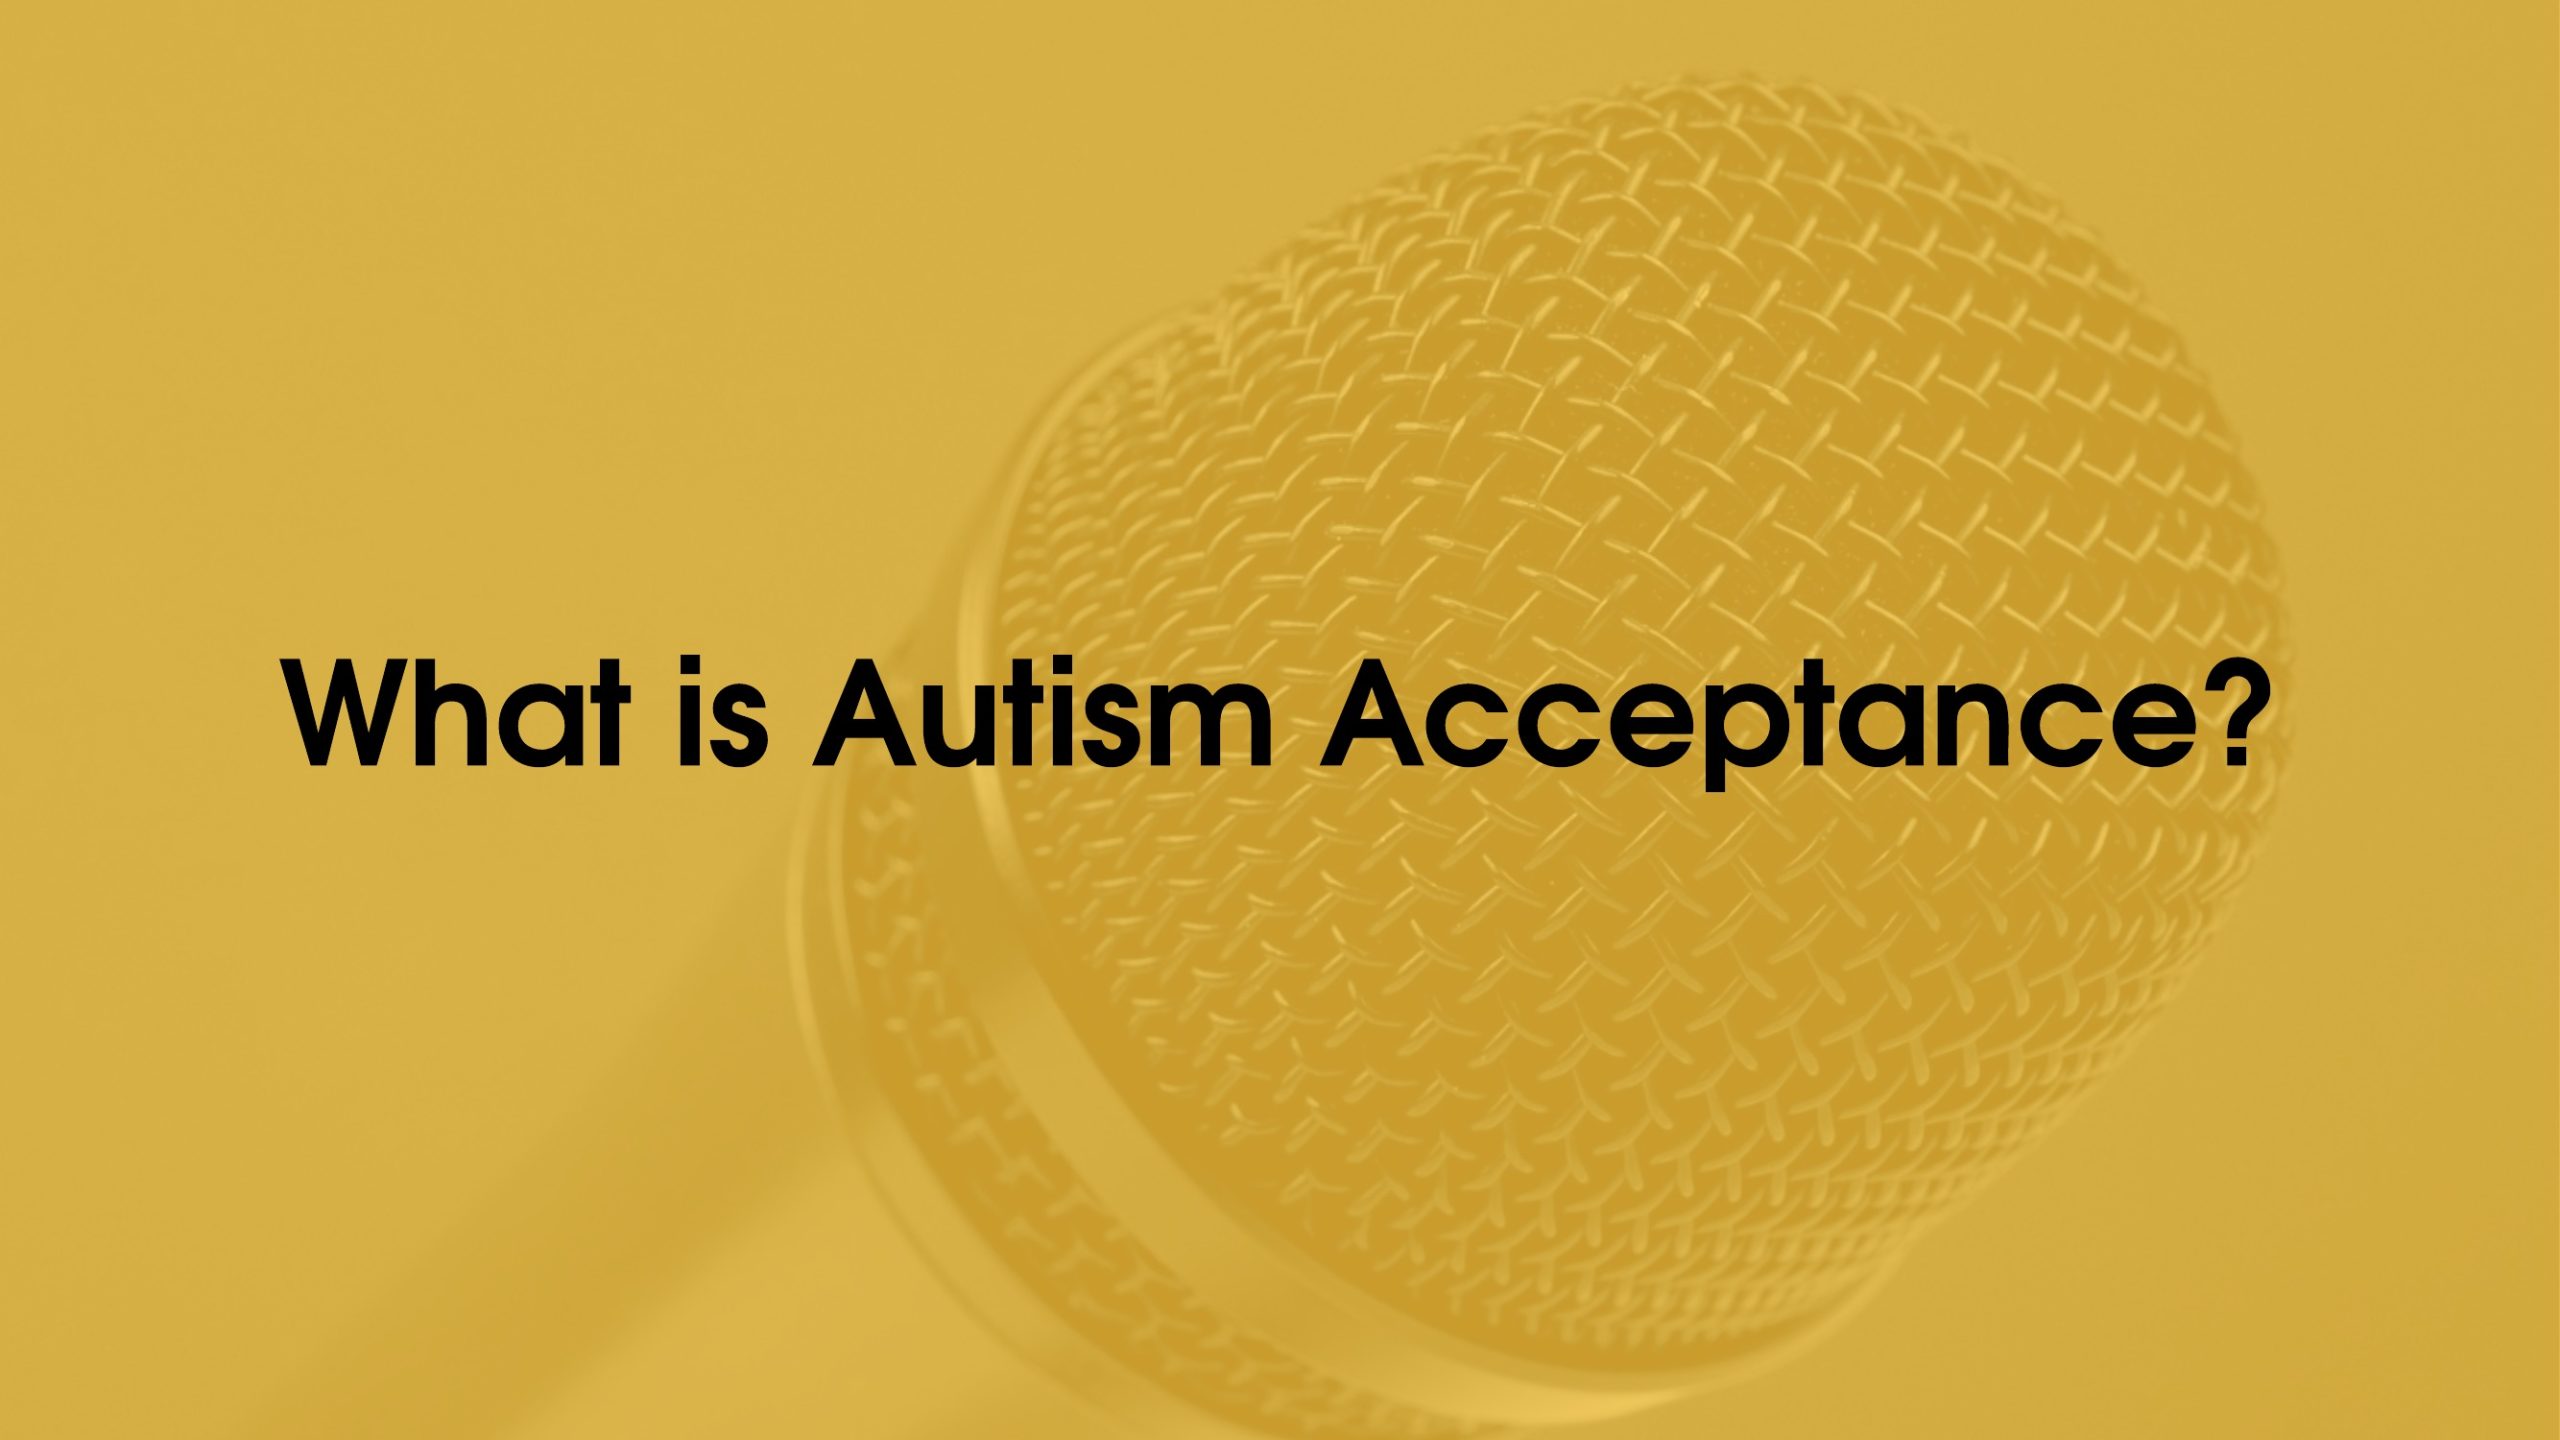 What is Autism Acceptance?